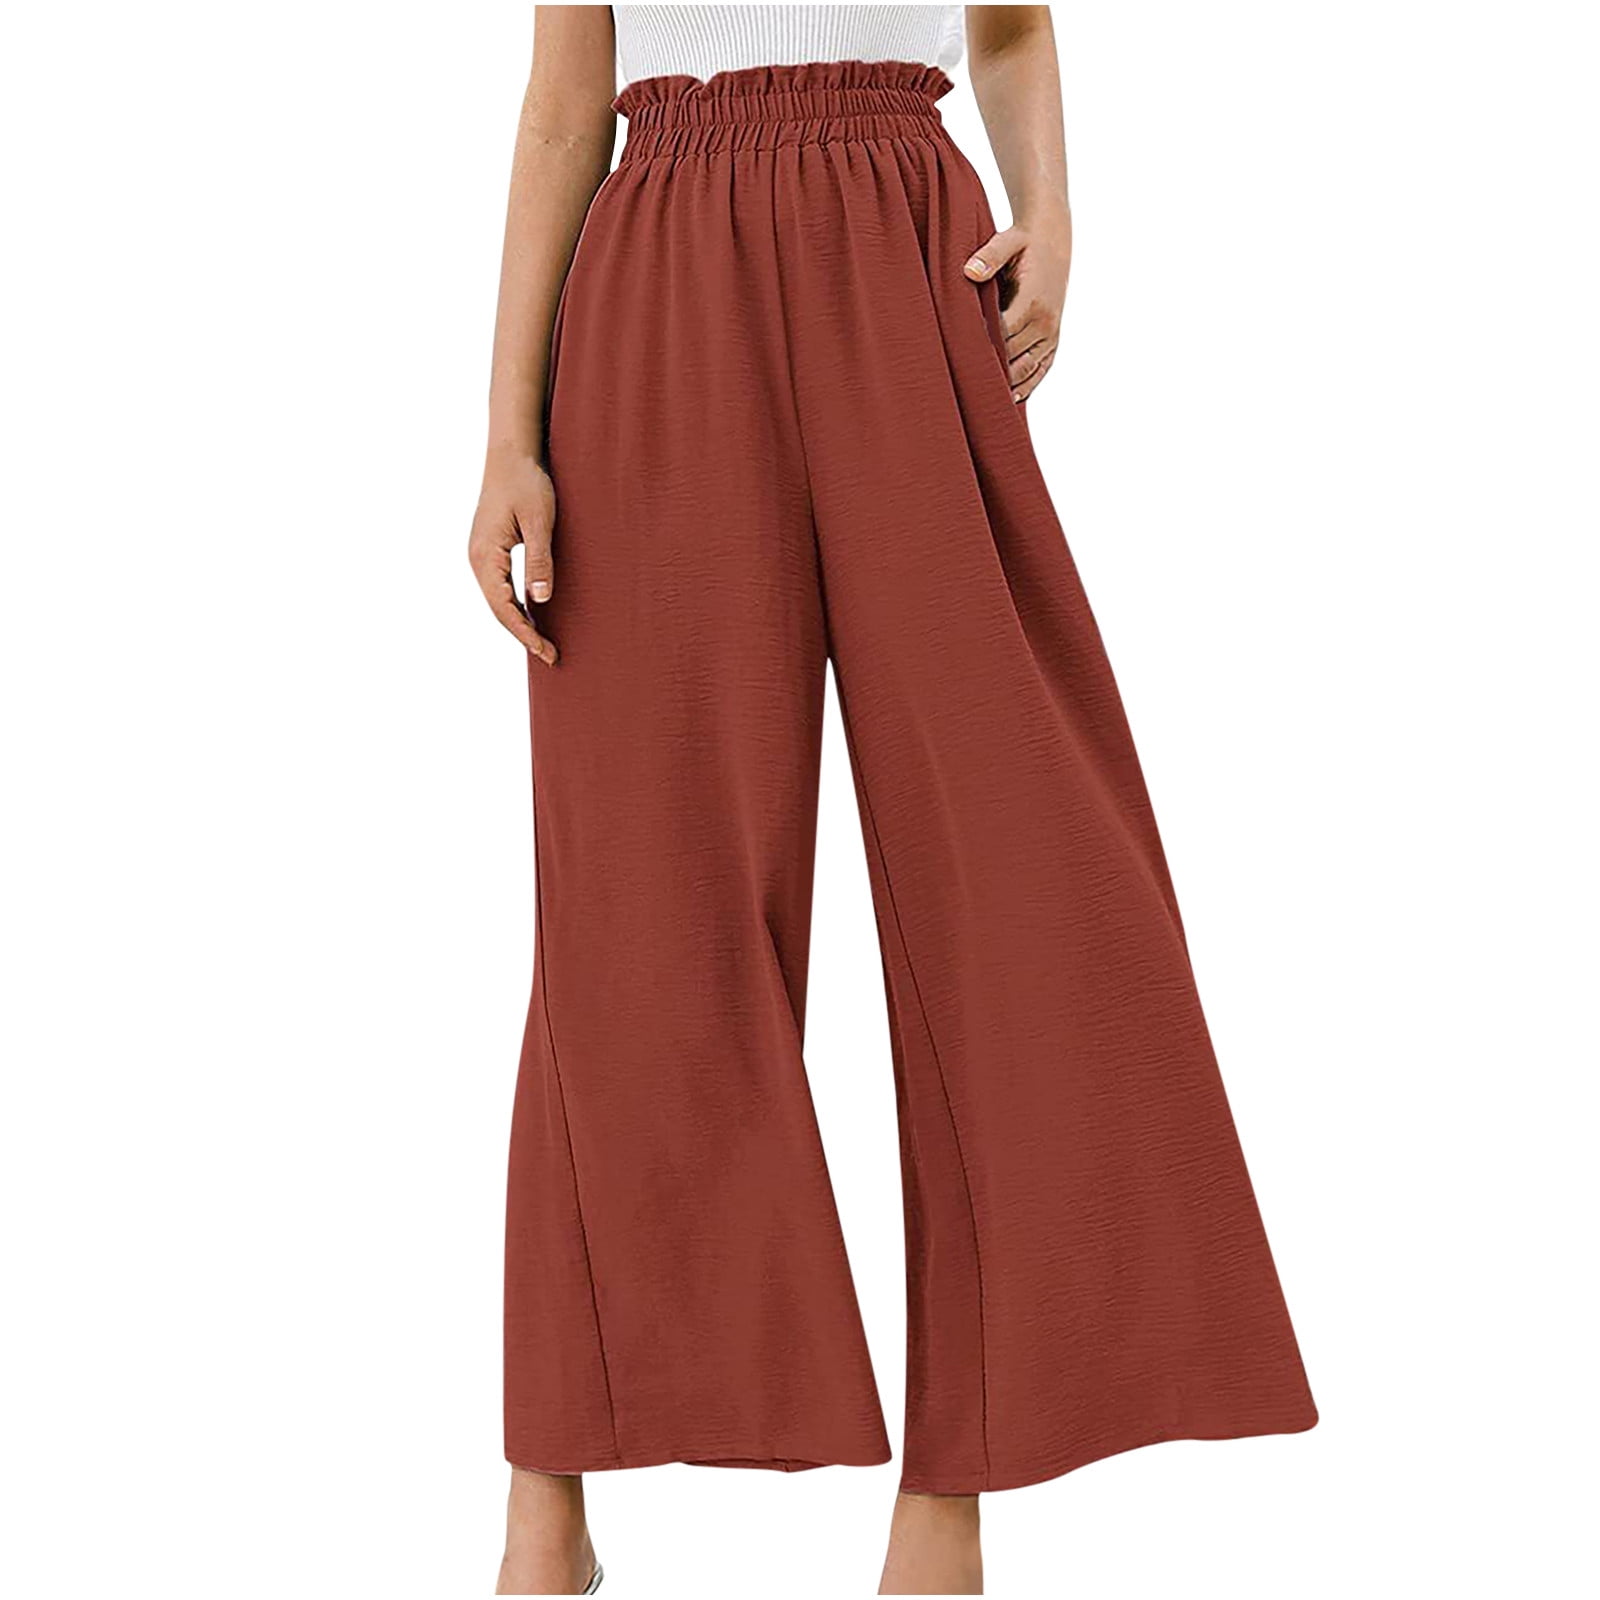 Palazzo Pants for Women Summer Elastic Smocked High Waisted